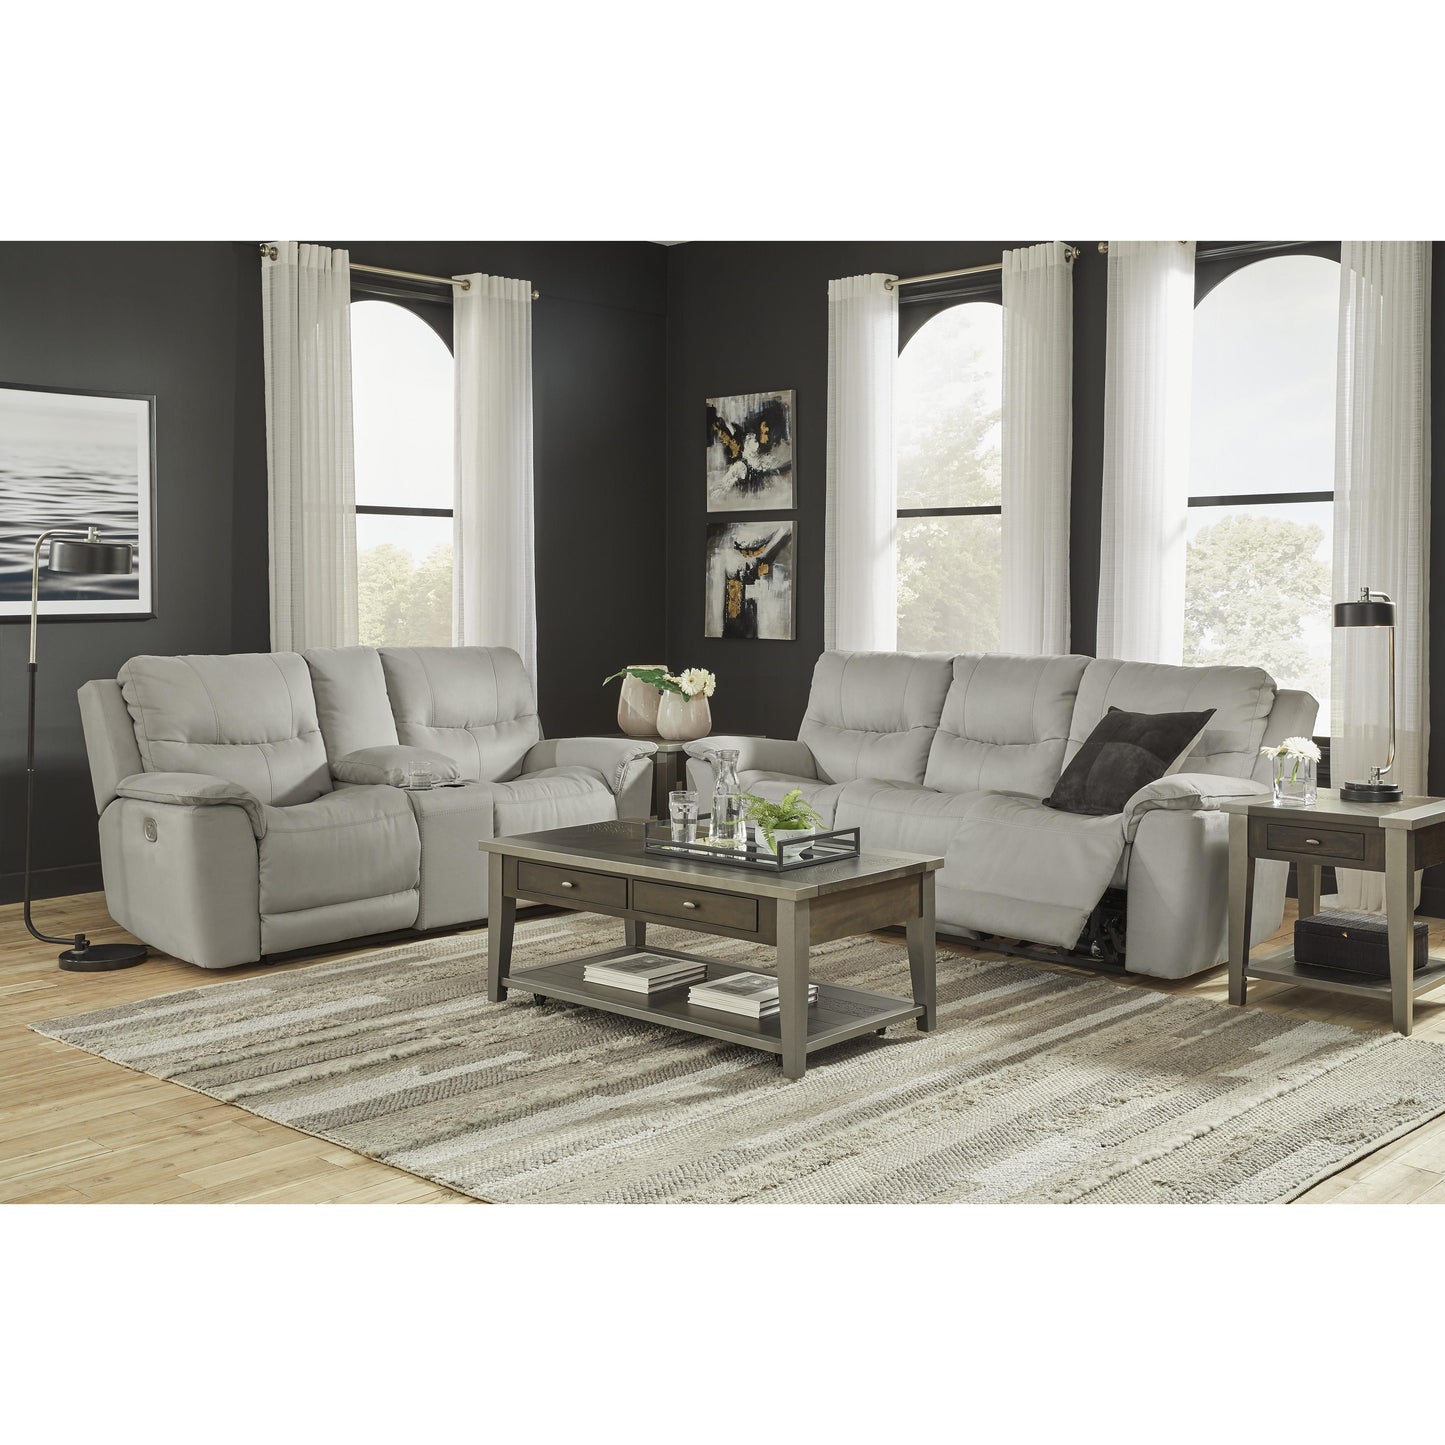 Signature Design by Ashley Next-Gen Gaucho Power Reclining Leather Look Loveseat 6080618 IMAGE 12